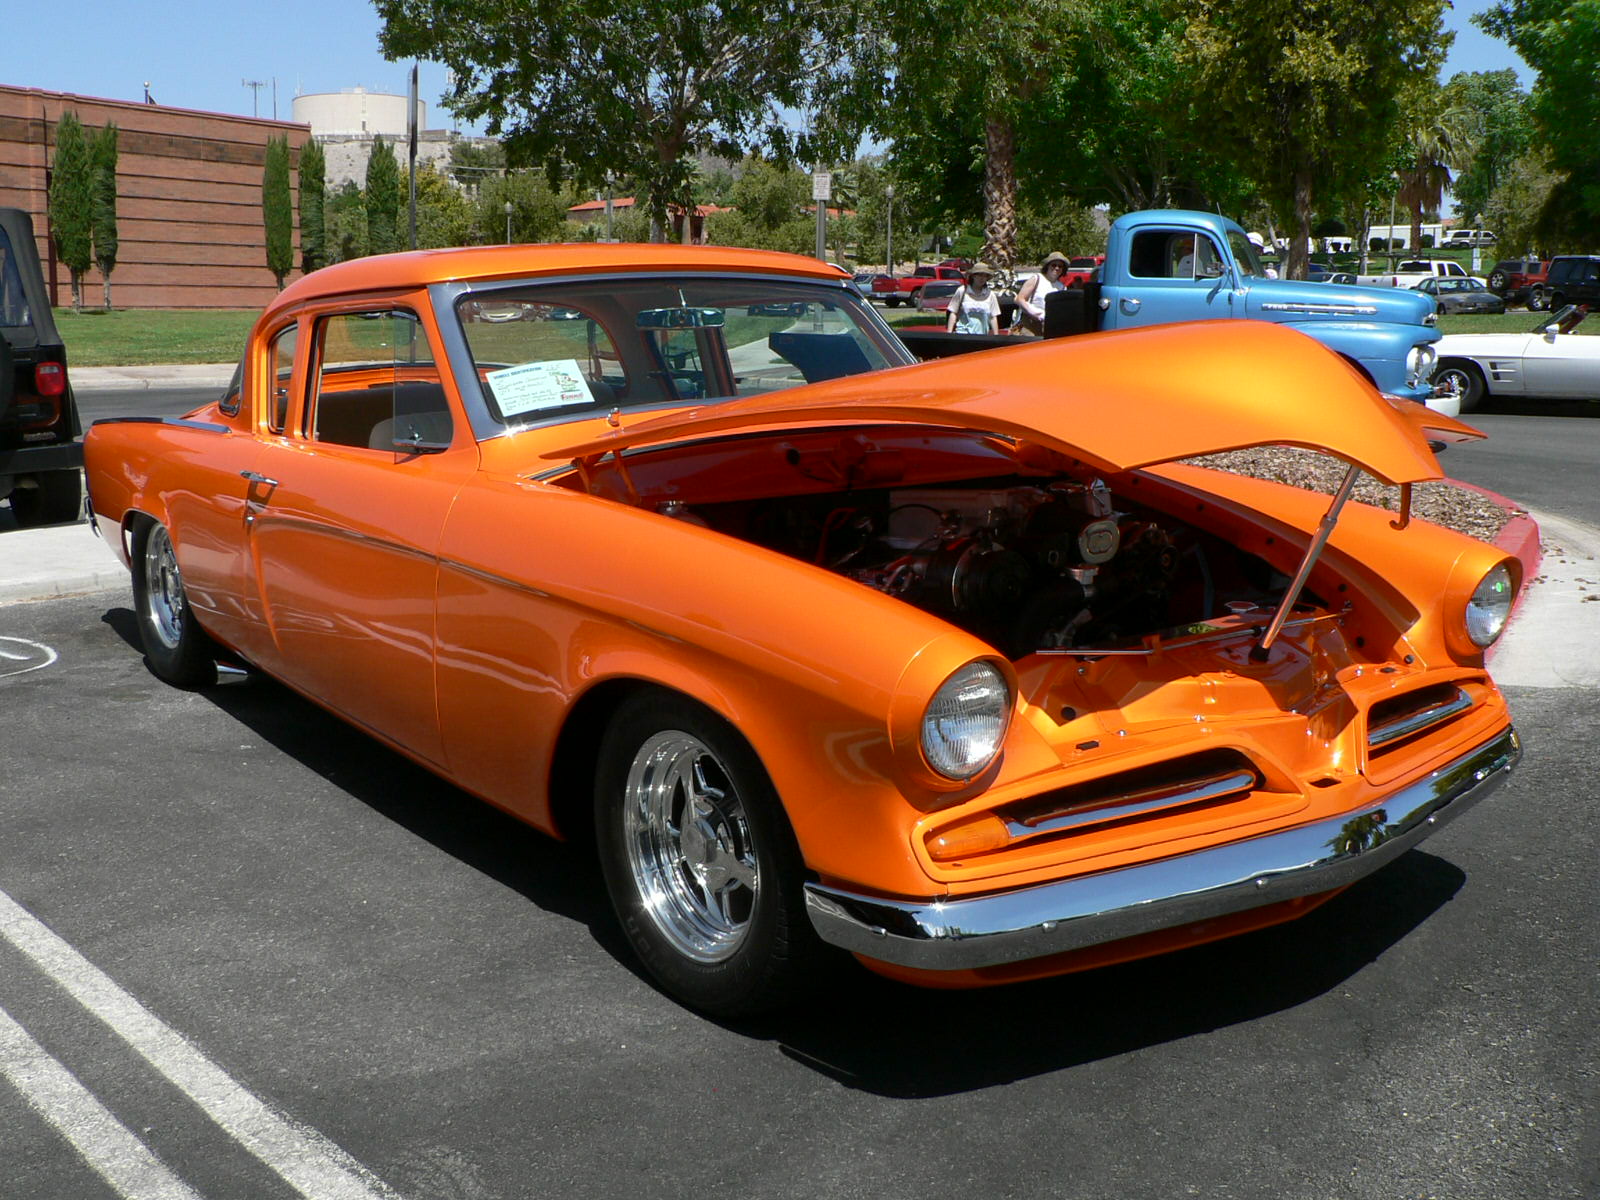 Orange Early 1950's Studebaker Coupe | Flickr - Photo Sharing!